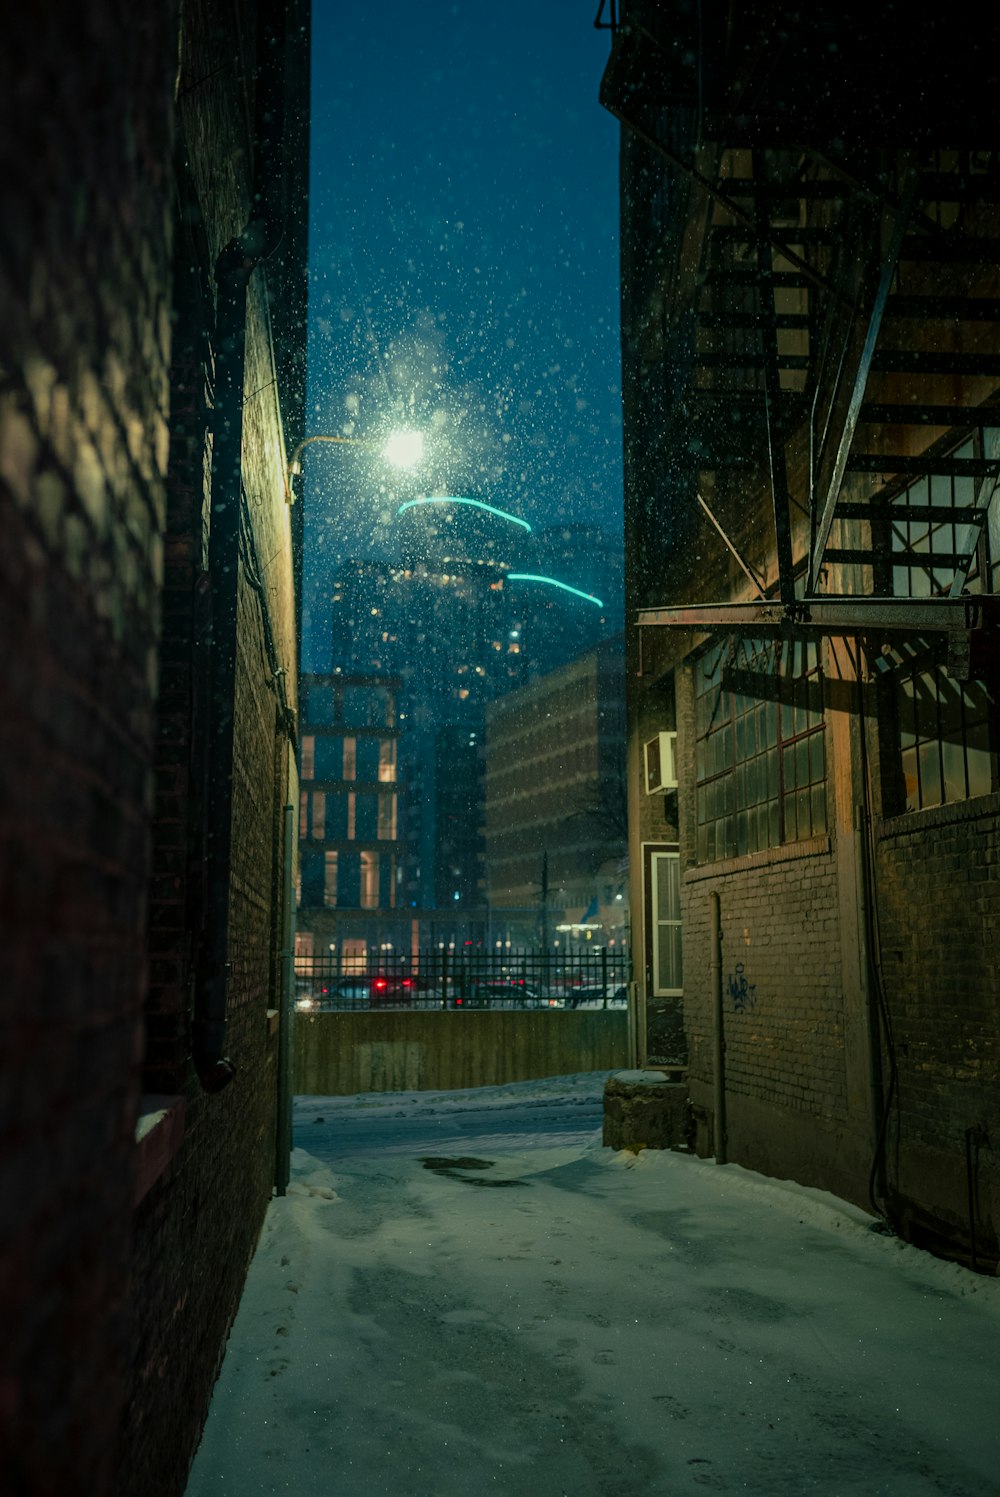 a city street at night with snow on the ground